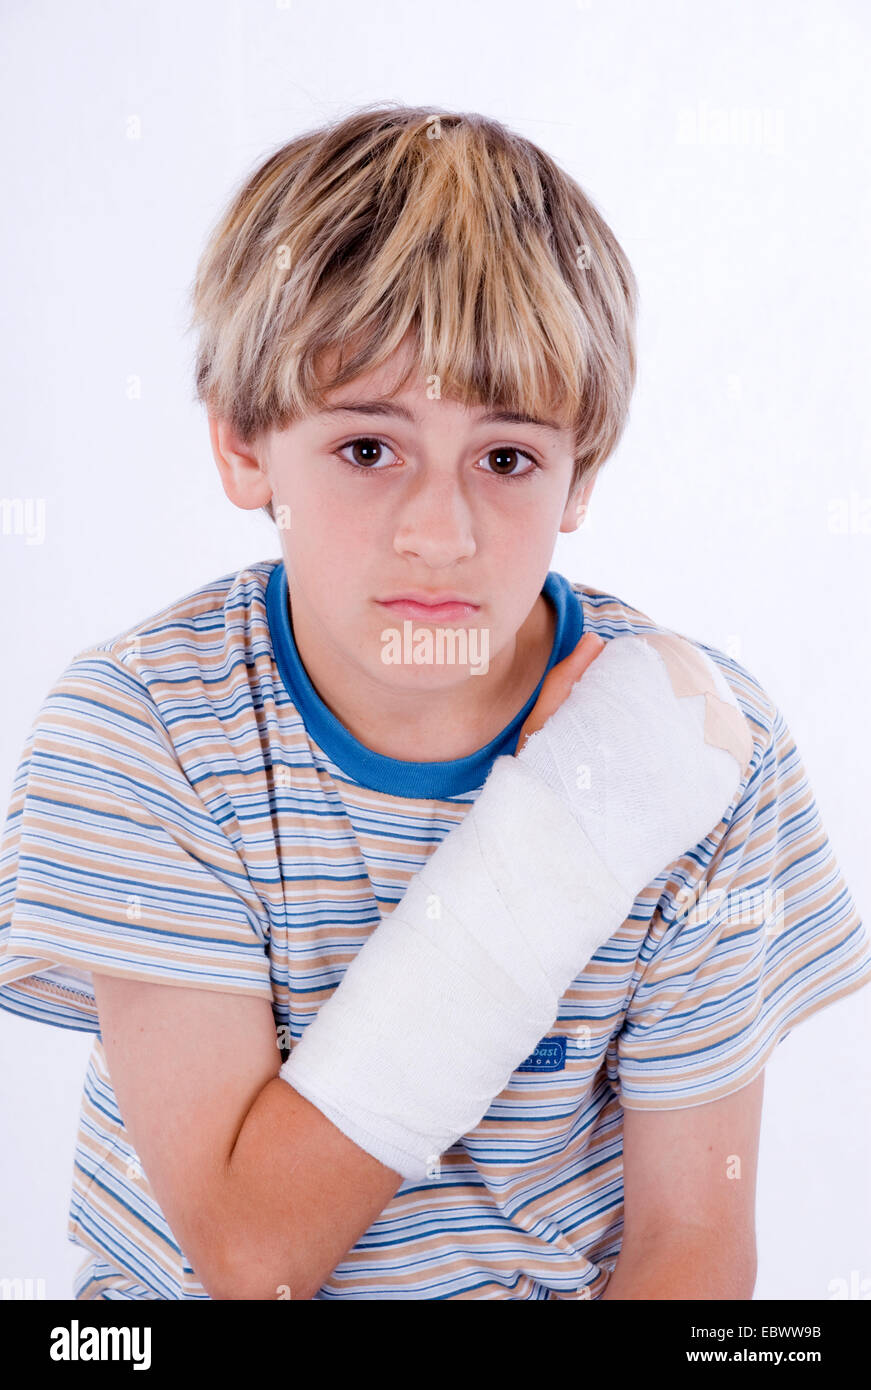 boy with arm in plaster Stock Photo